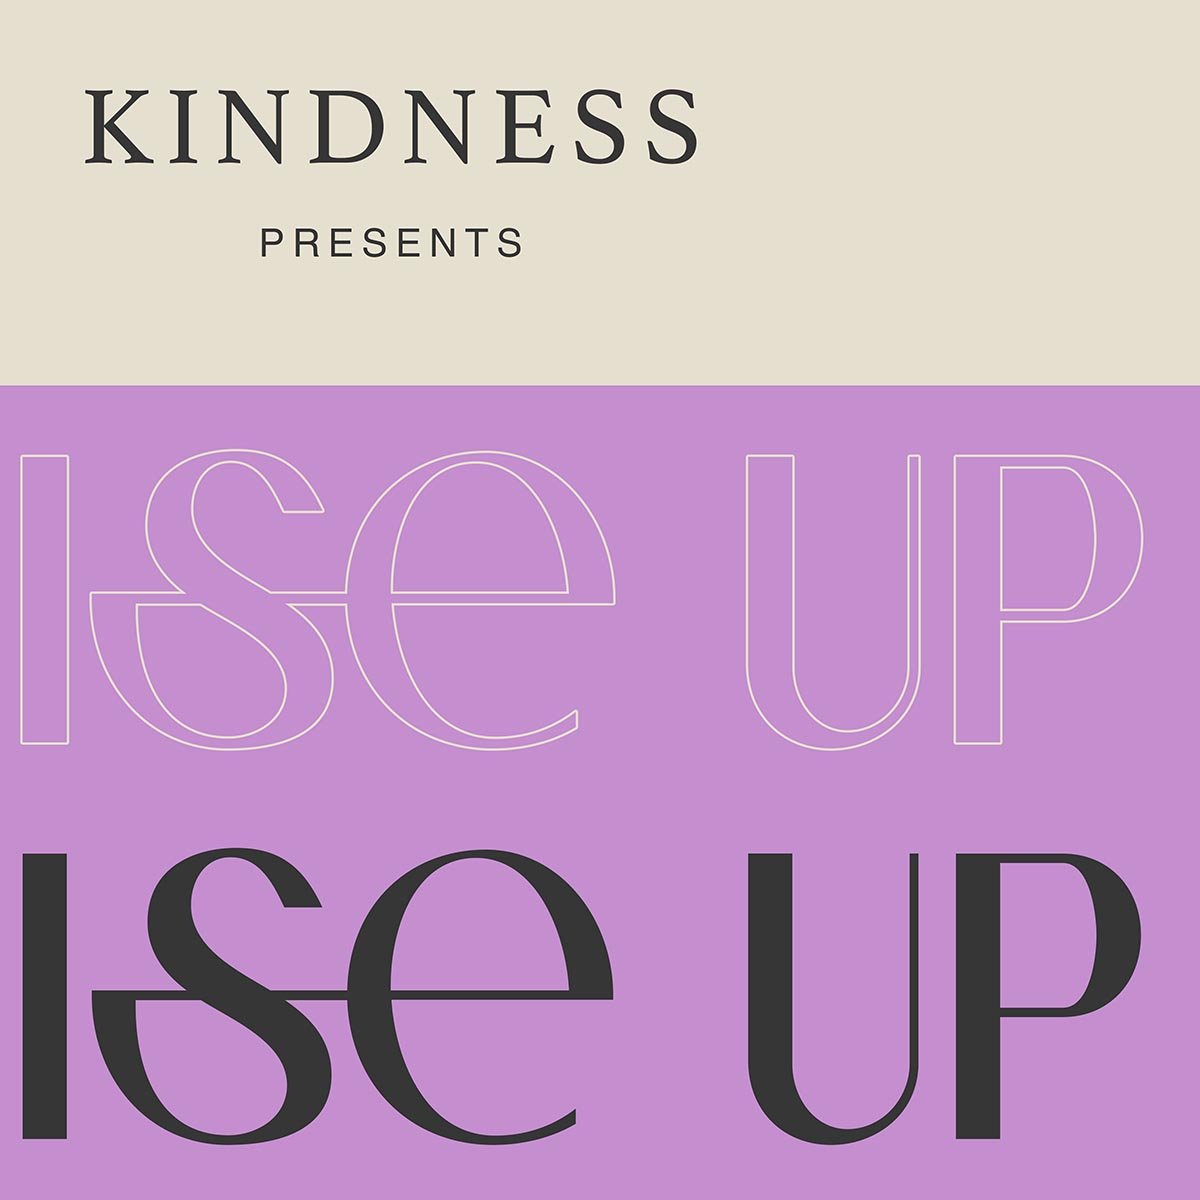 Raise Up by Kindness